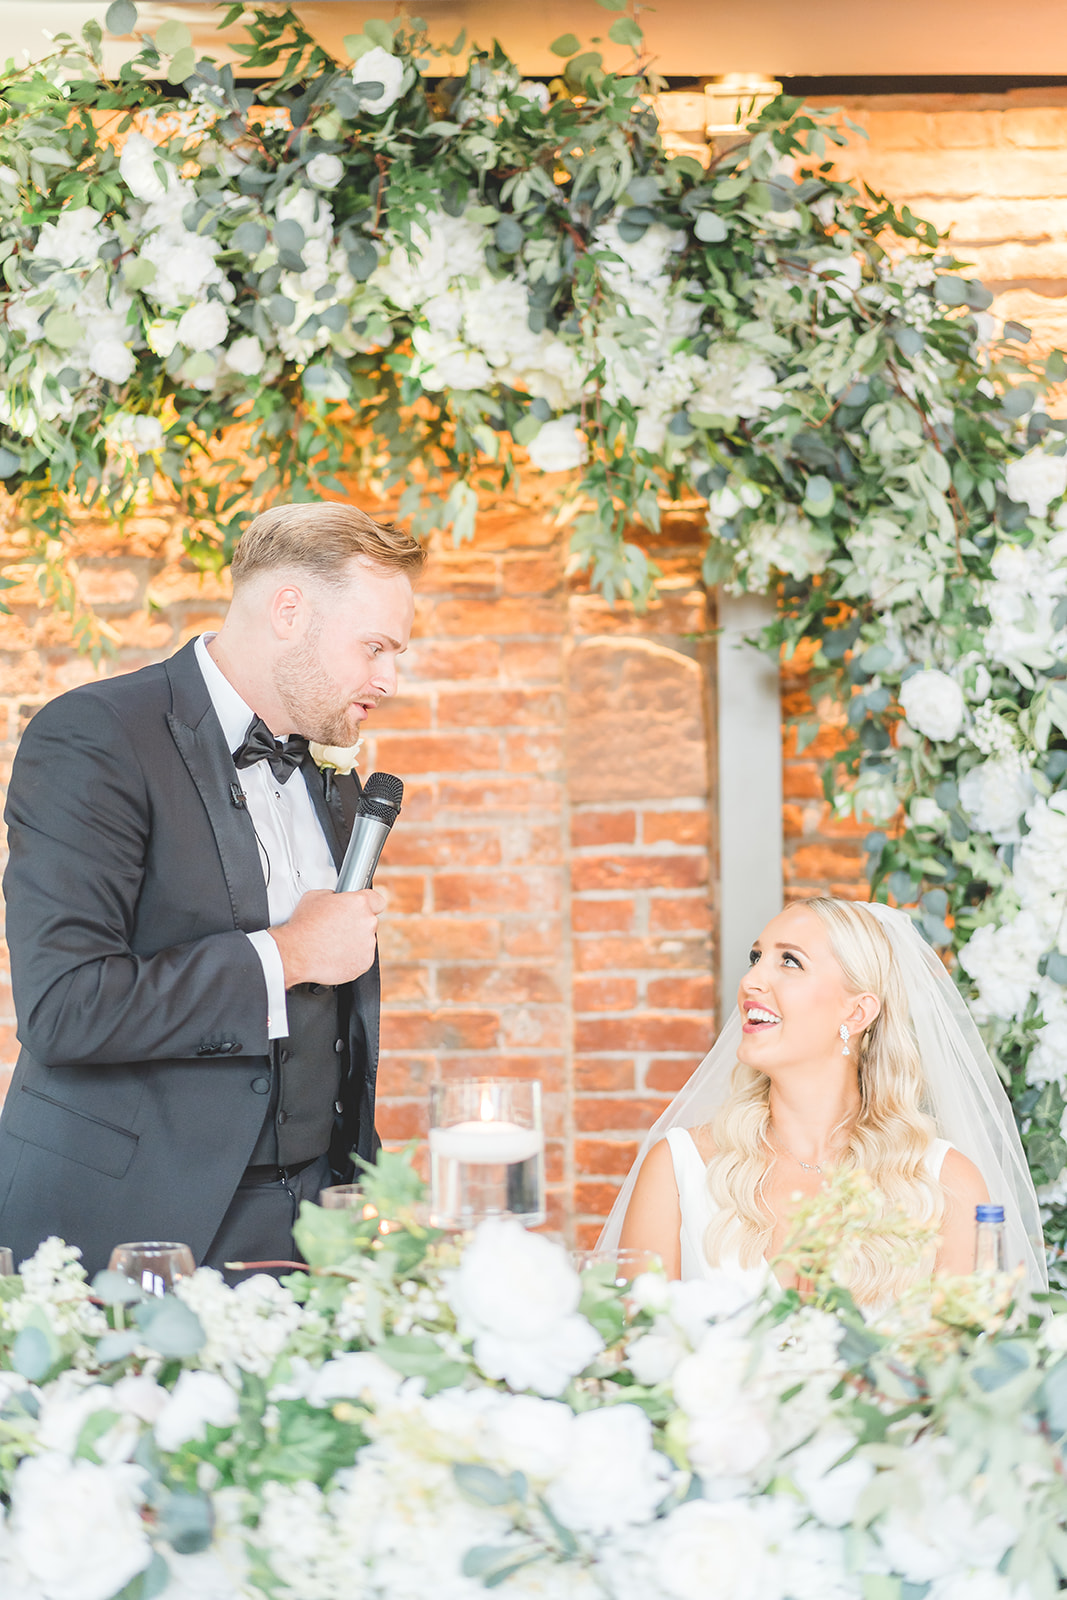 light and airy weddings at dorfold hall, Cheshire